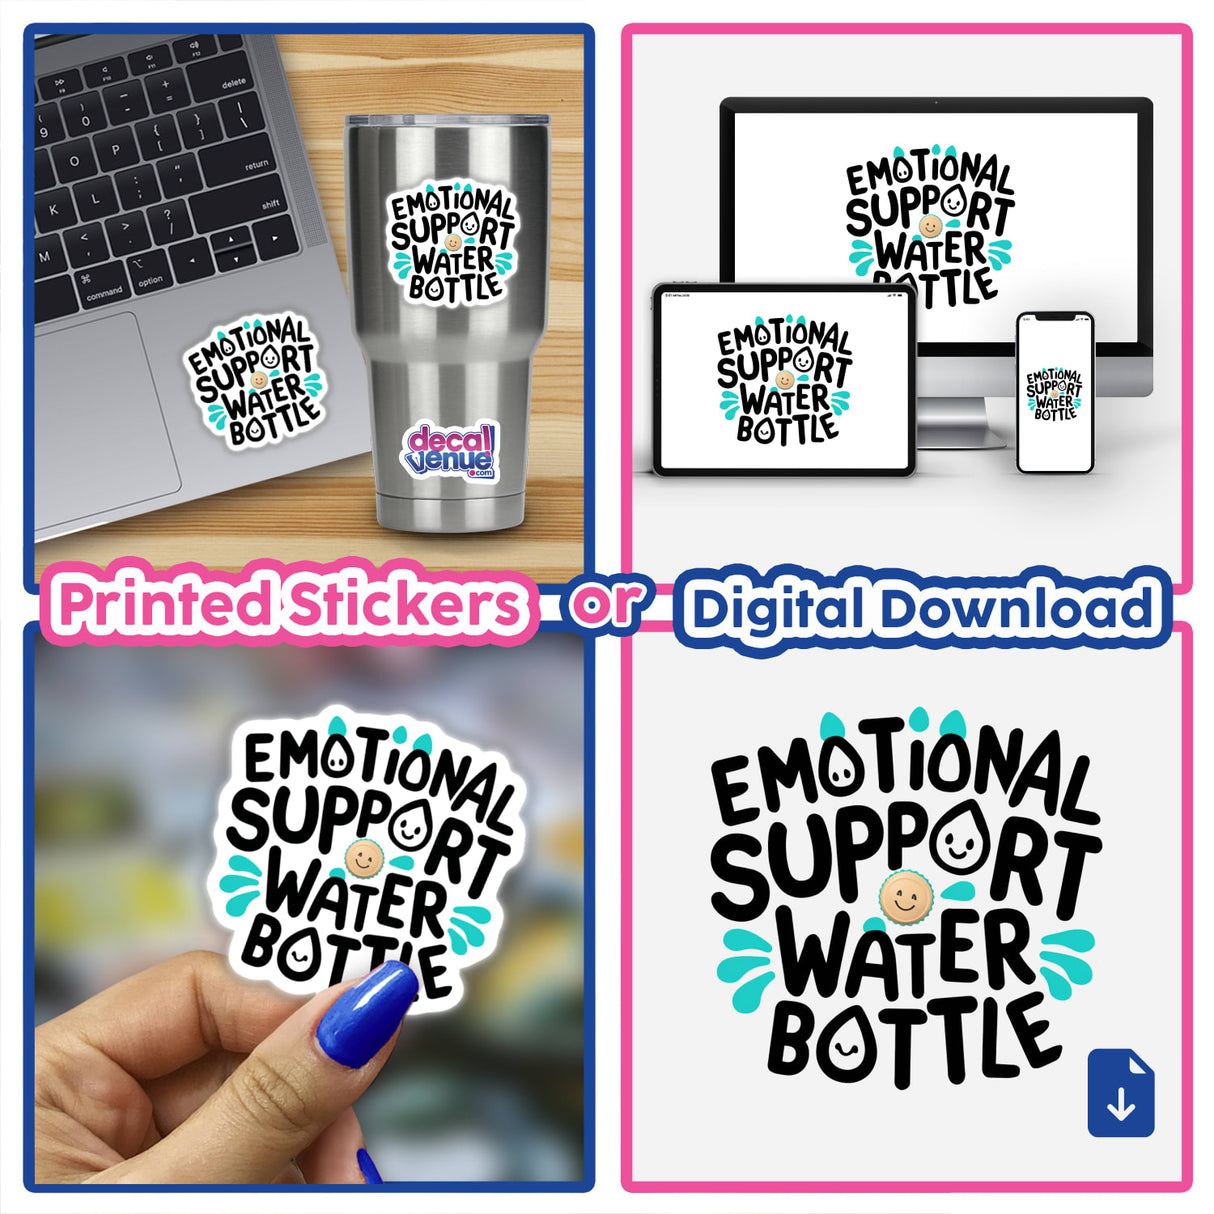 Vibrant "Emotional Support Water Bottle" - fun, colorful digital artwork on water bottle, laptop, and prints featuring a playful design